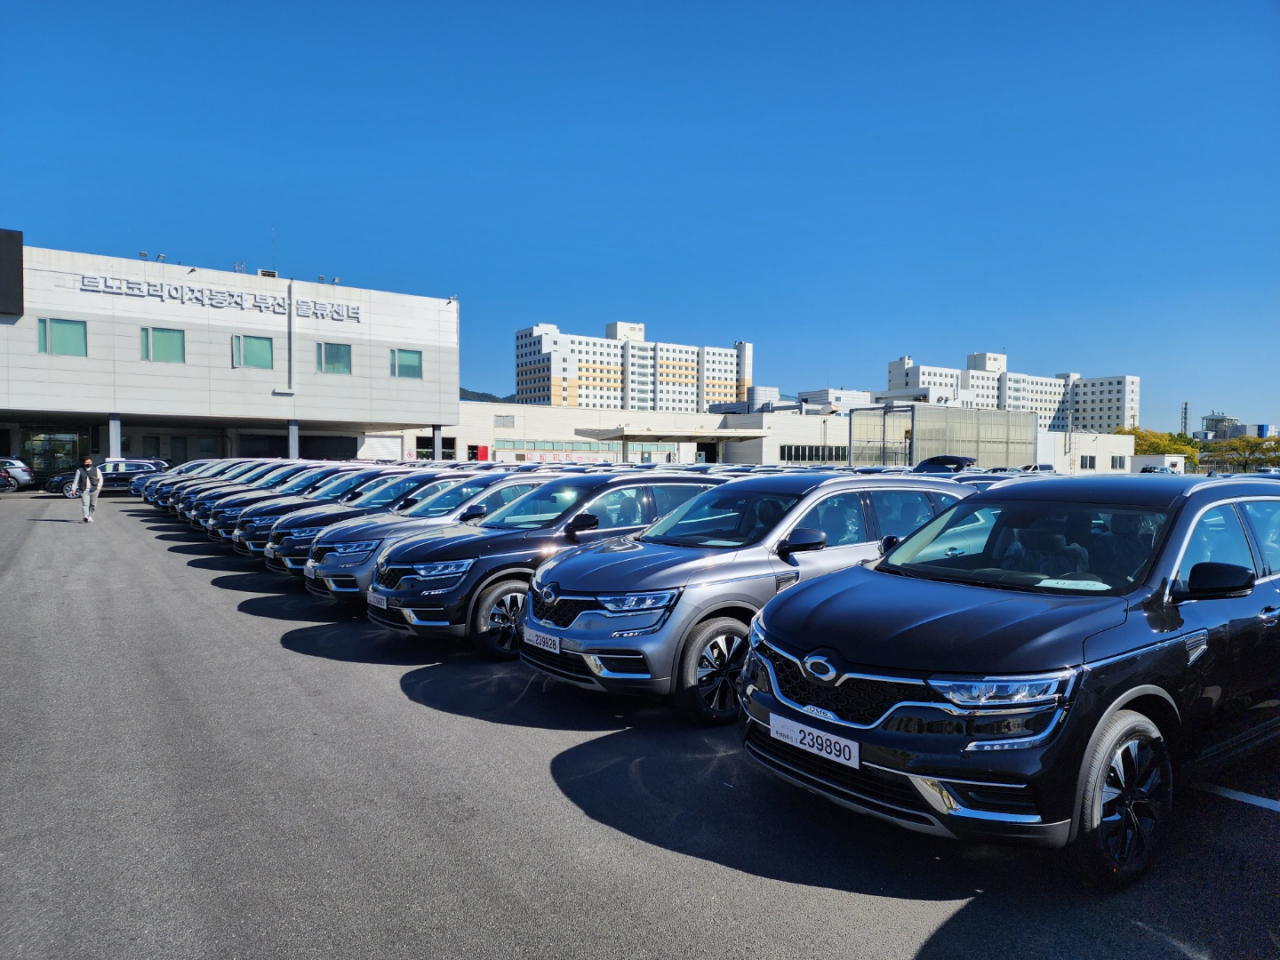 Renault Korea's QM6 vehicles, which are to be supplied to local police, are parked at the automaker's distribution center in Busan. (Renault Korea)